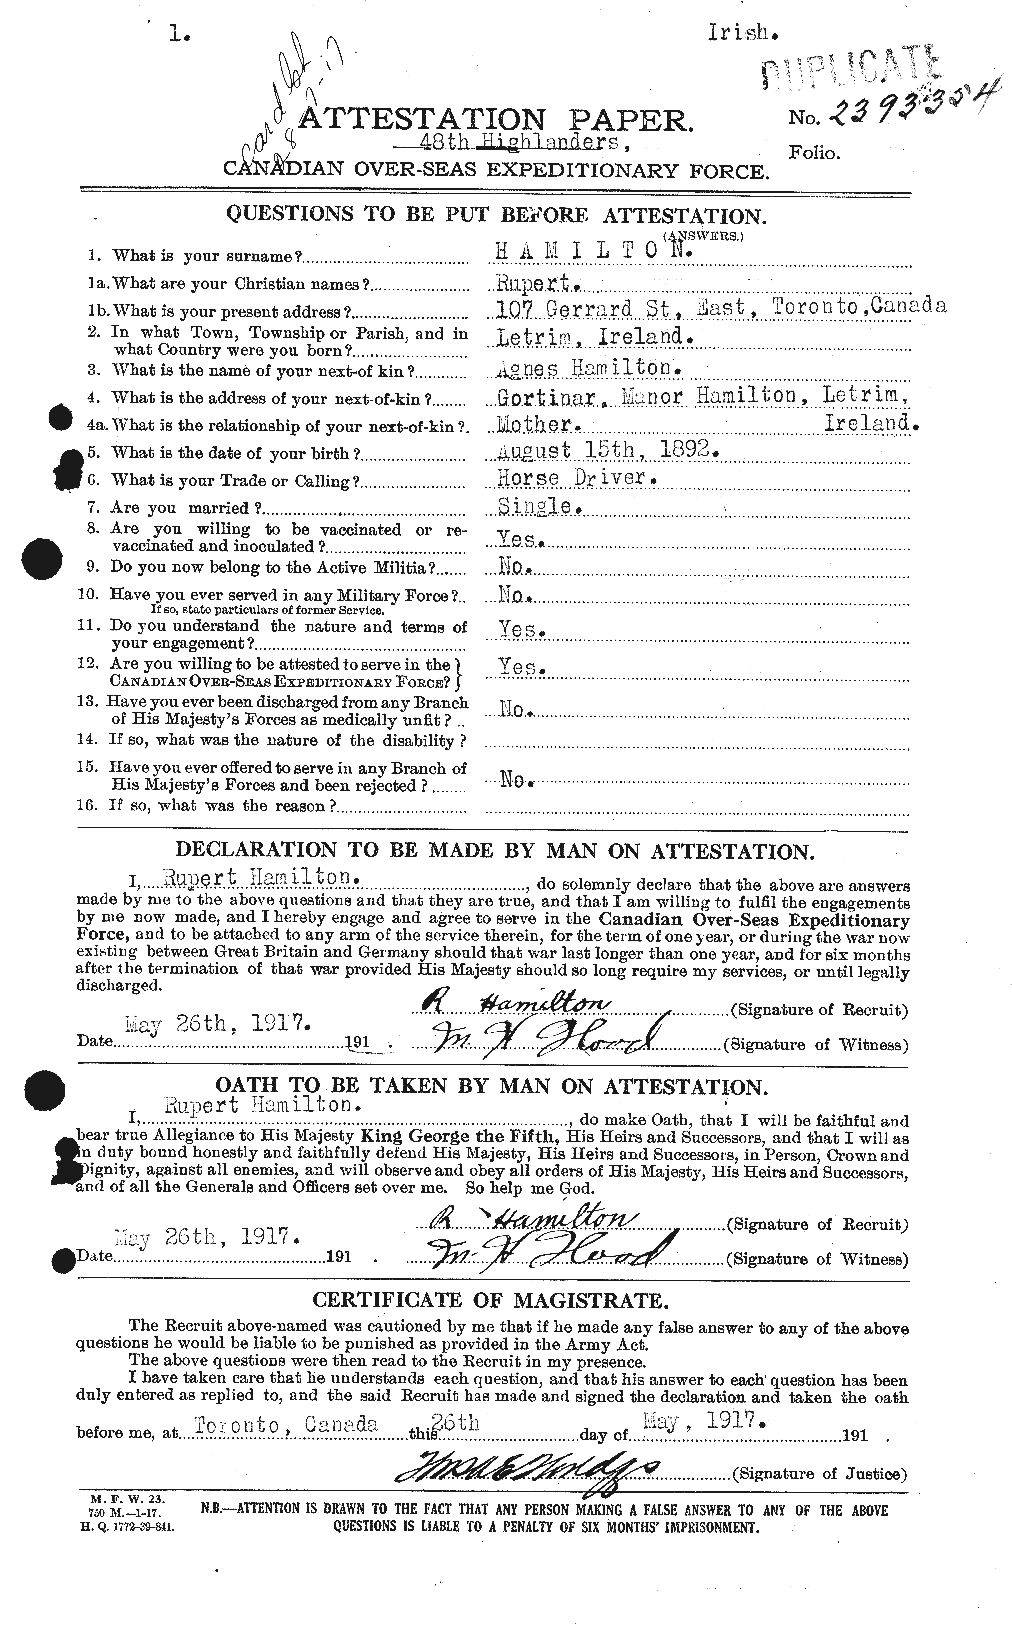 Personnel Records of the First World War - CEF 373293a